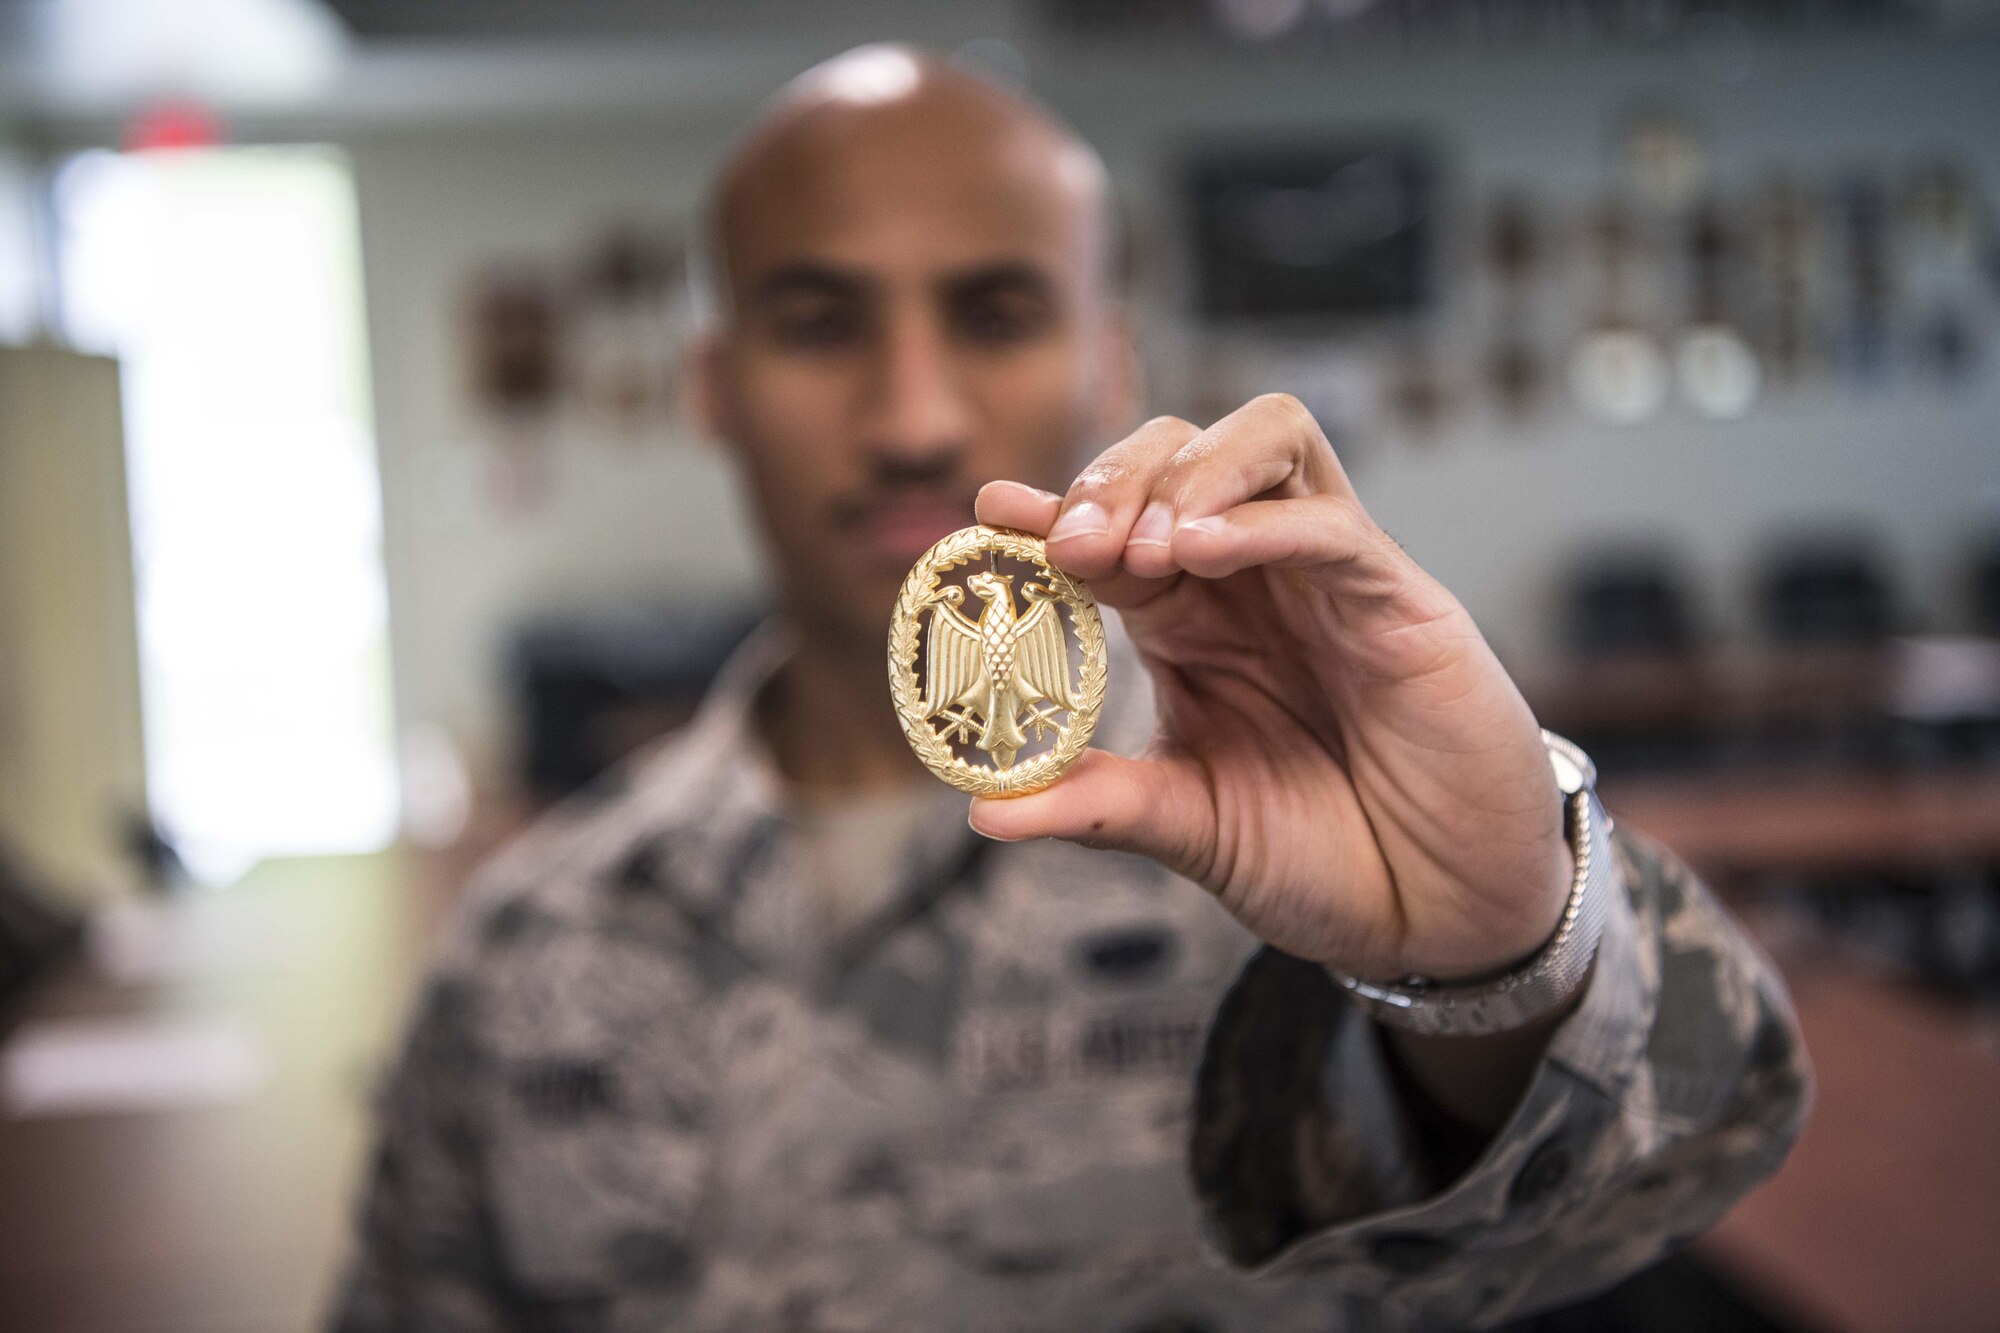 Staff Sgt. Johnathan Flynn, a defender with the 130th Airlift Wing, holds the gold German Armed Forces Proficiency Badge (GAFPB), Sept. 16, 2017, at McLaughlin Air National Guard Base, Charleston, West Virginia. The GAFPB a decoration of the Bundeswehr, the Armed Forces of the Federal Republic of Germany. As one of the few foreign badges that are authorized to be worn on the U.S. military uniform, the GAFPB is one of the most highly sought-after awards. Flynn earned the gold badge after completing a rigorous course with nine other defenders from the 130th AW. (U.S. Air National Guard photo by Tech. Sgt. De-Juan Haley)